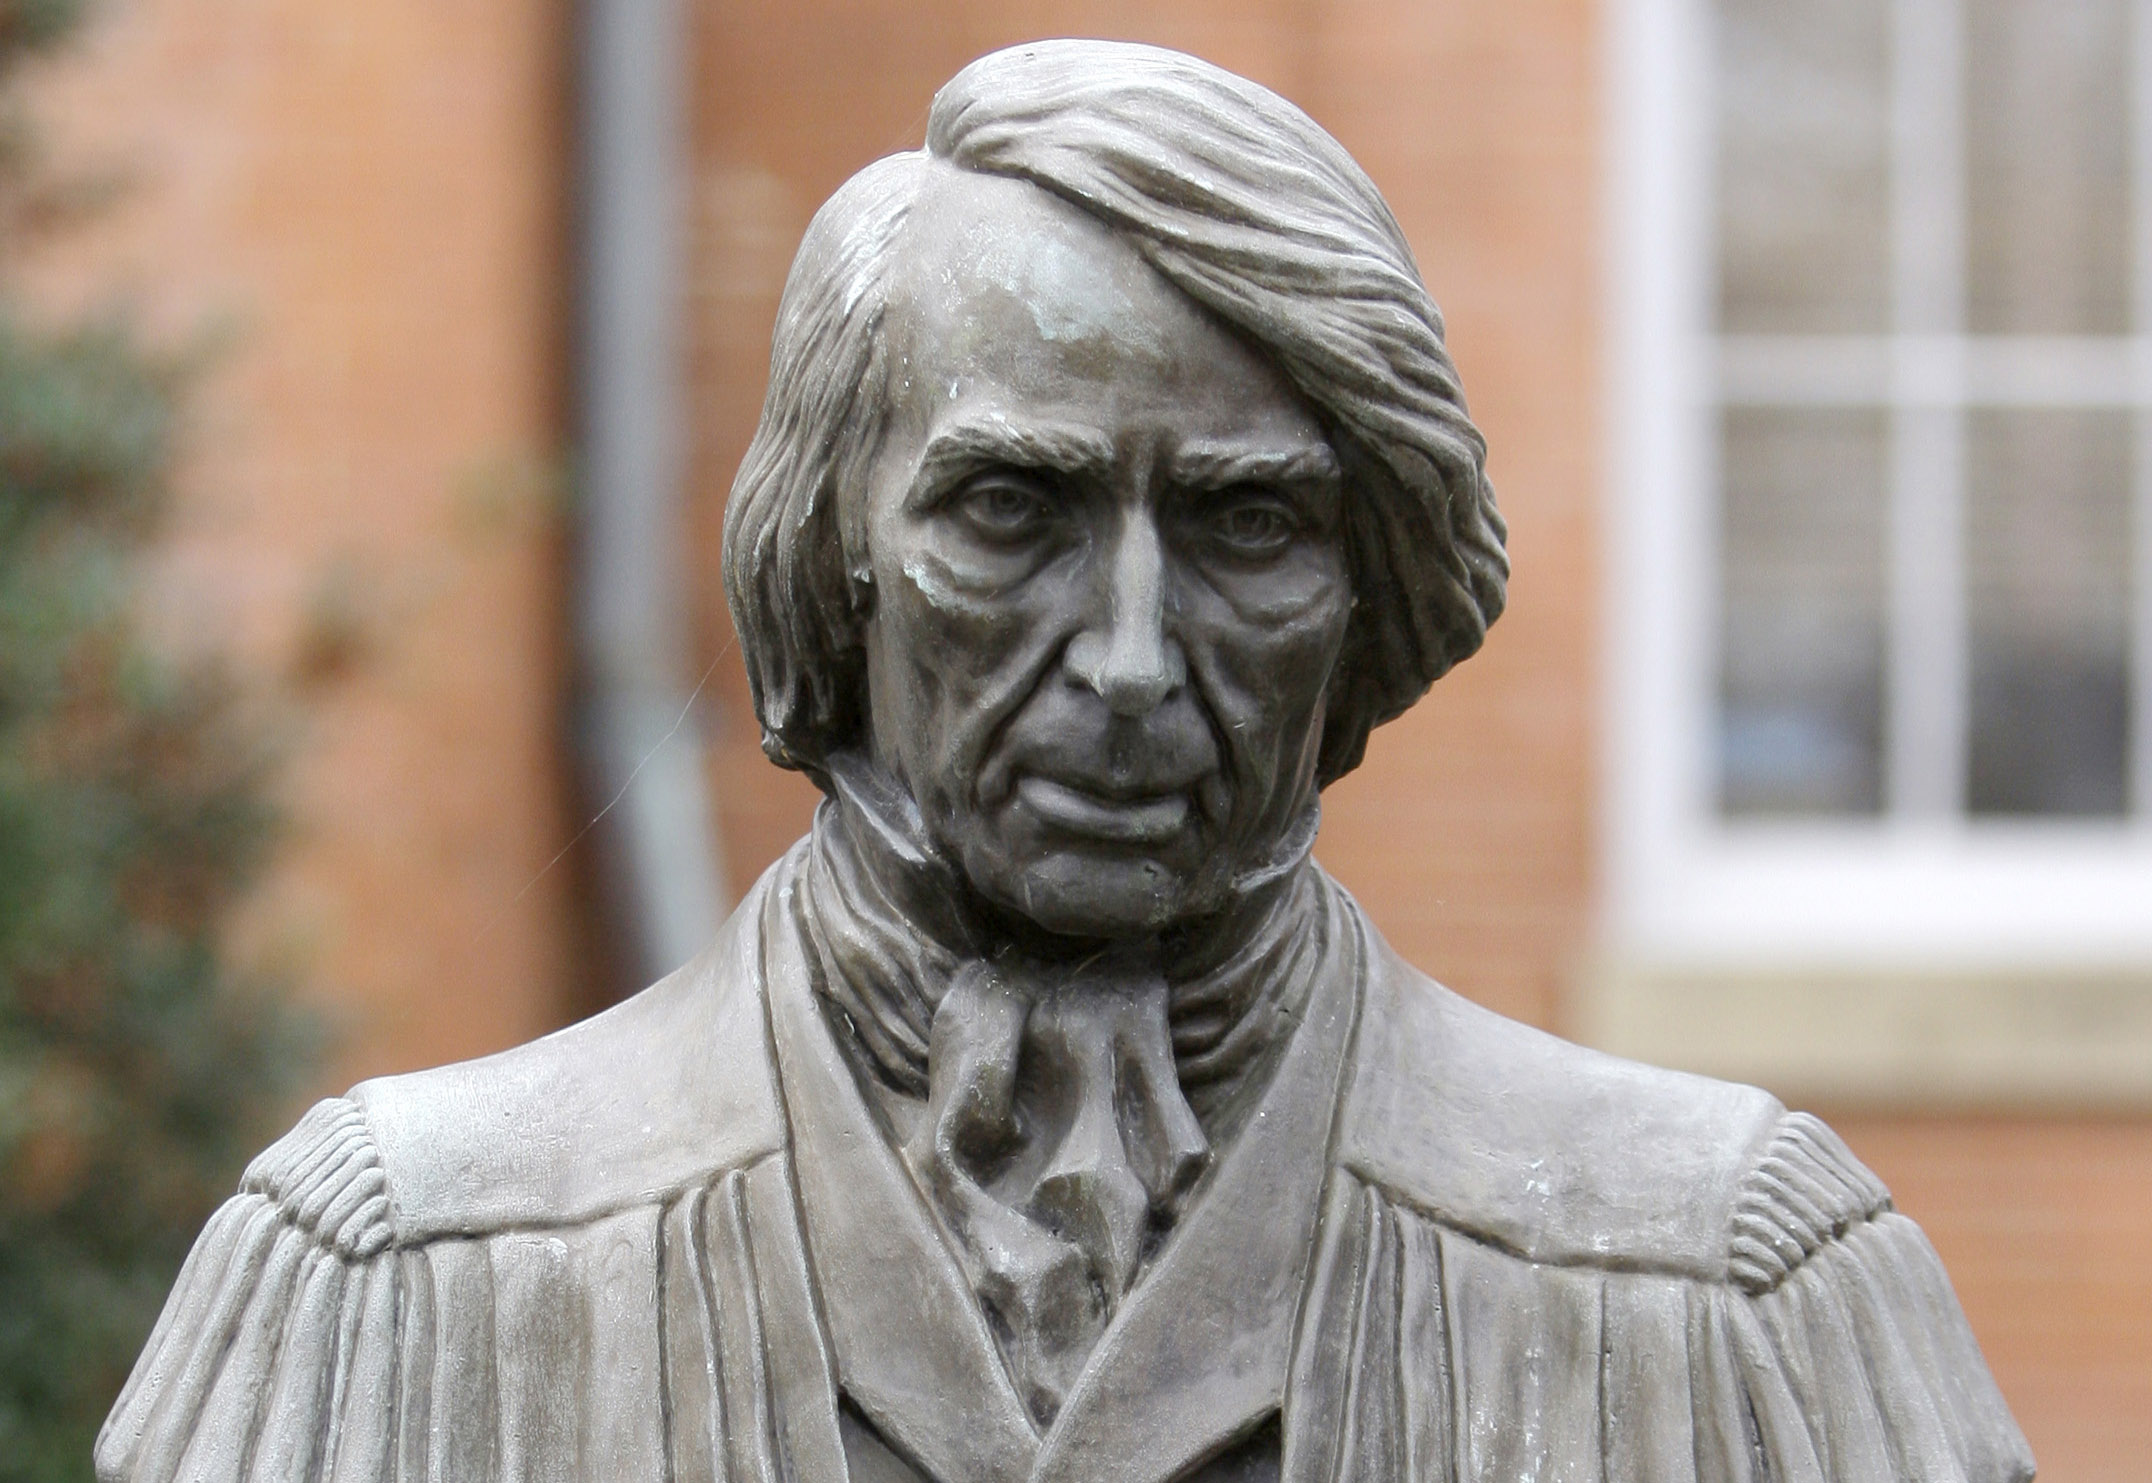 A statue of Supreme Court Chief Justice Roger Brooke Taney is displayed in front of City Hall, in Frederick, Md. (Rob Carr—AP)